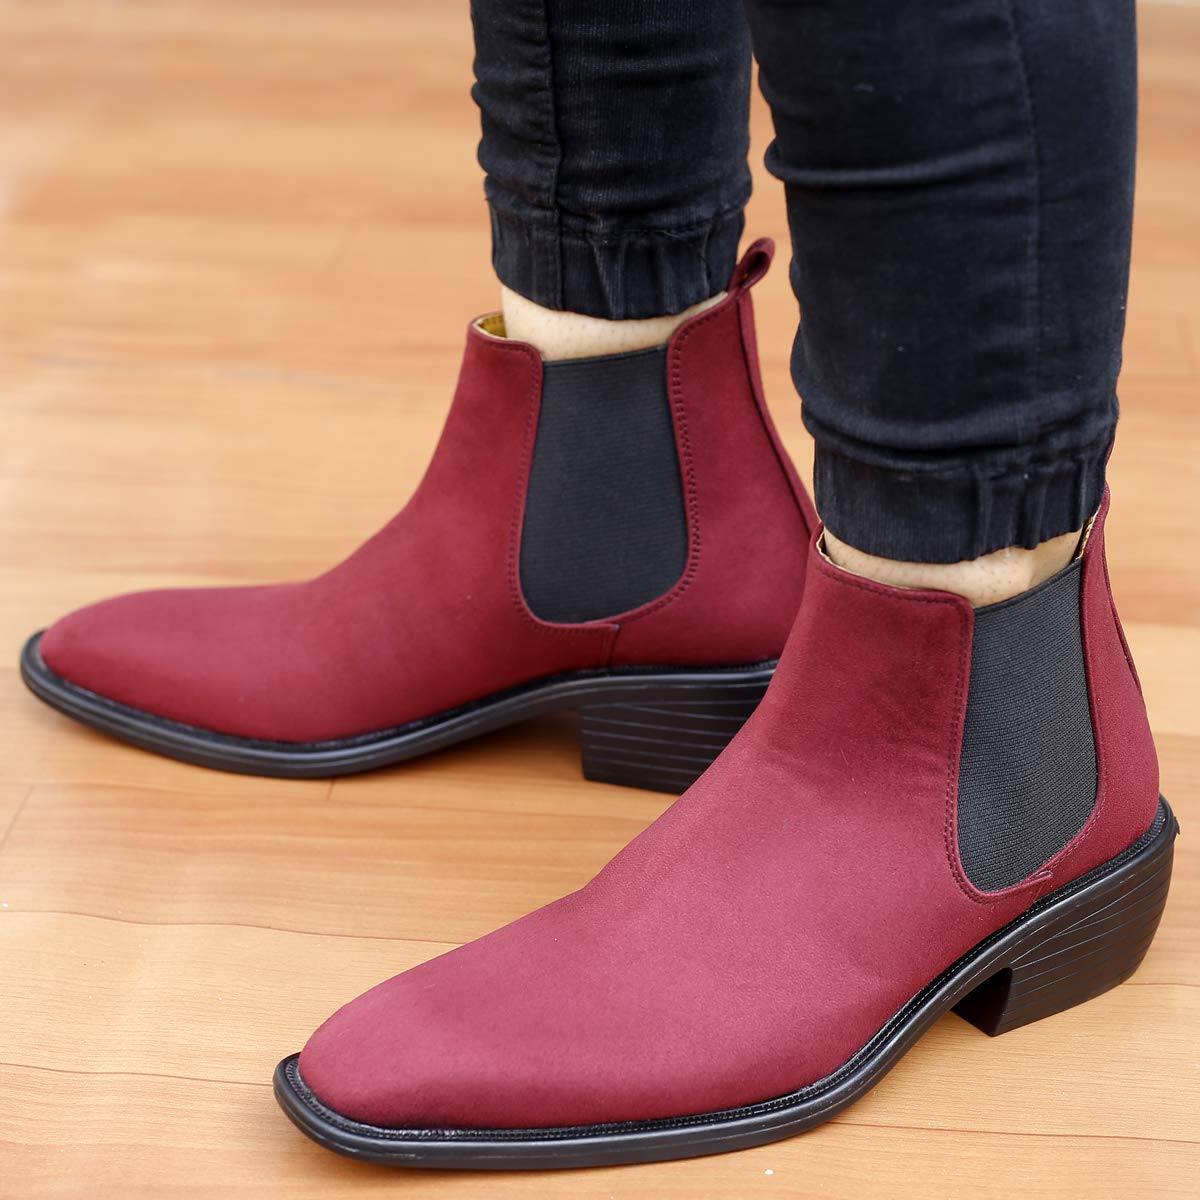 Height Increasing Suede Material Red Casual Chelsea Boots For Men-Unique and Classy